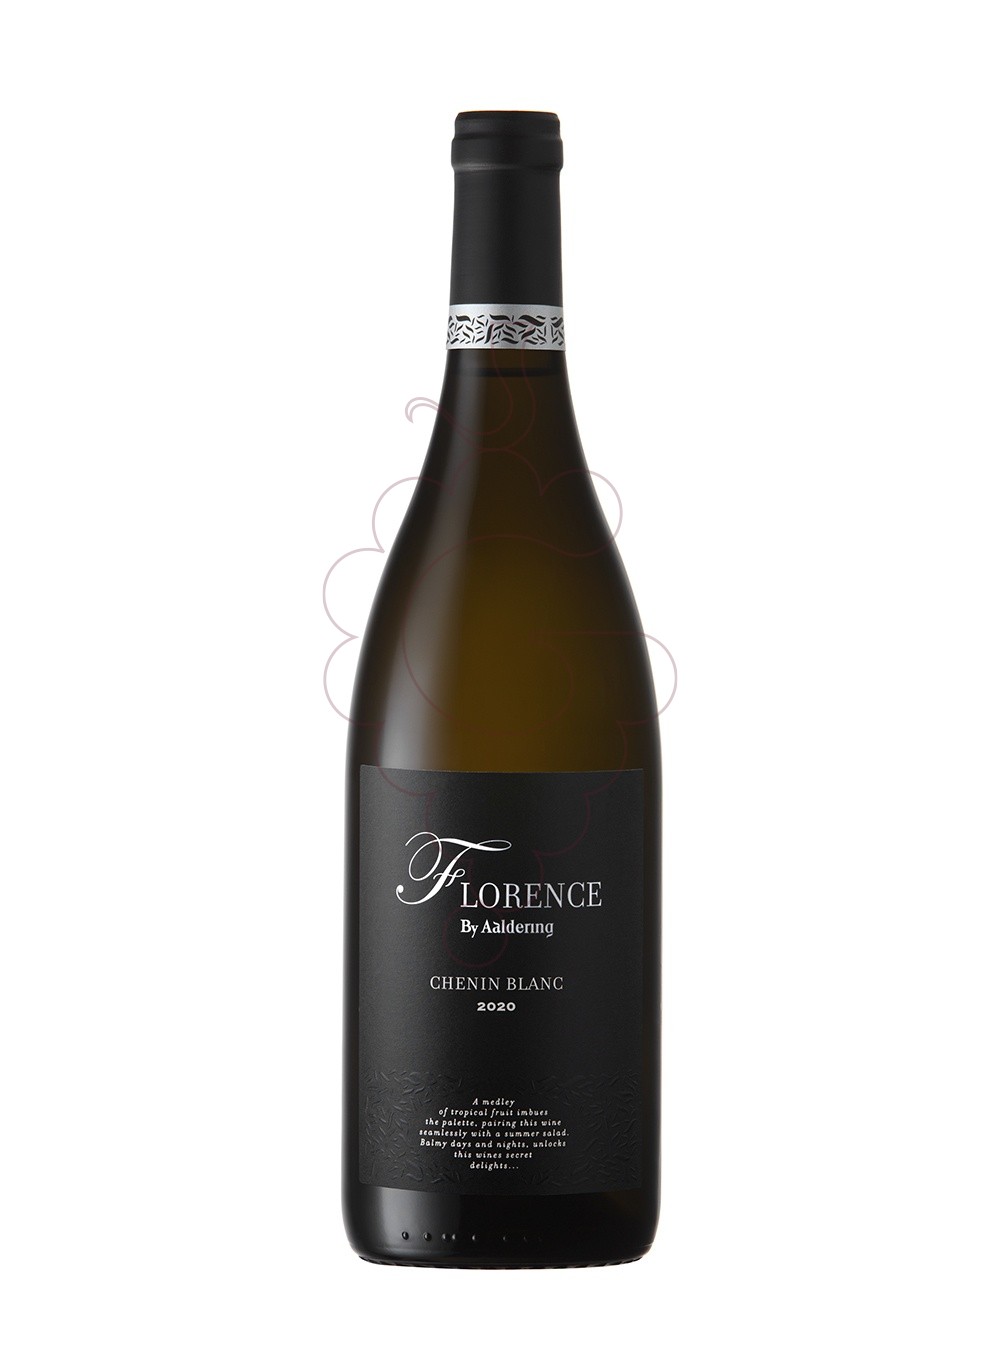 Photo Aaldering florence f 2020 75cl white wine